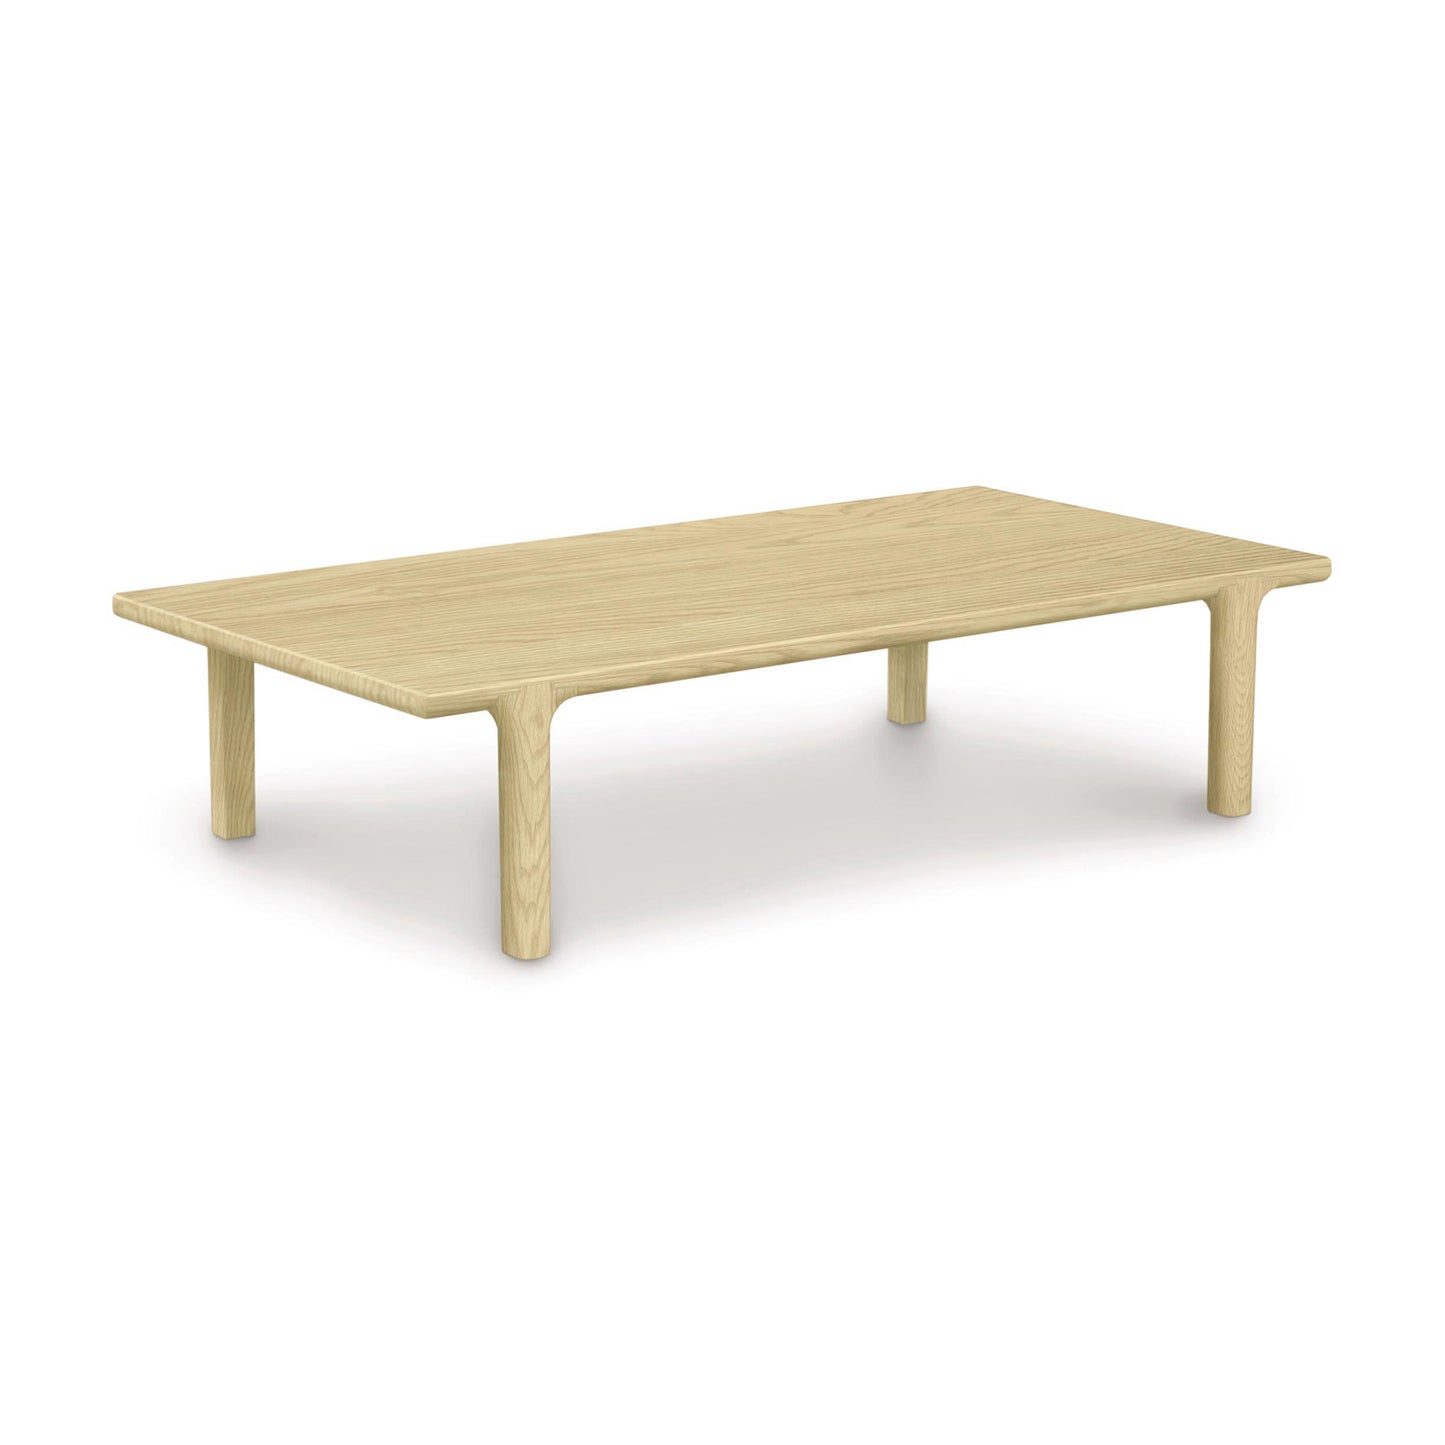 A Sierra Rectangular Coffee Table by Copeland Furniture on a white background, featuring a contemporary design.